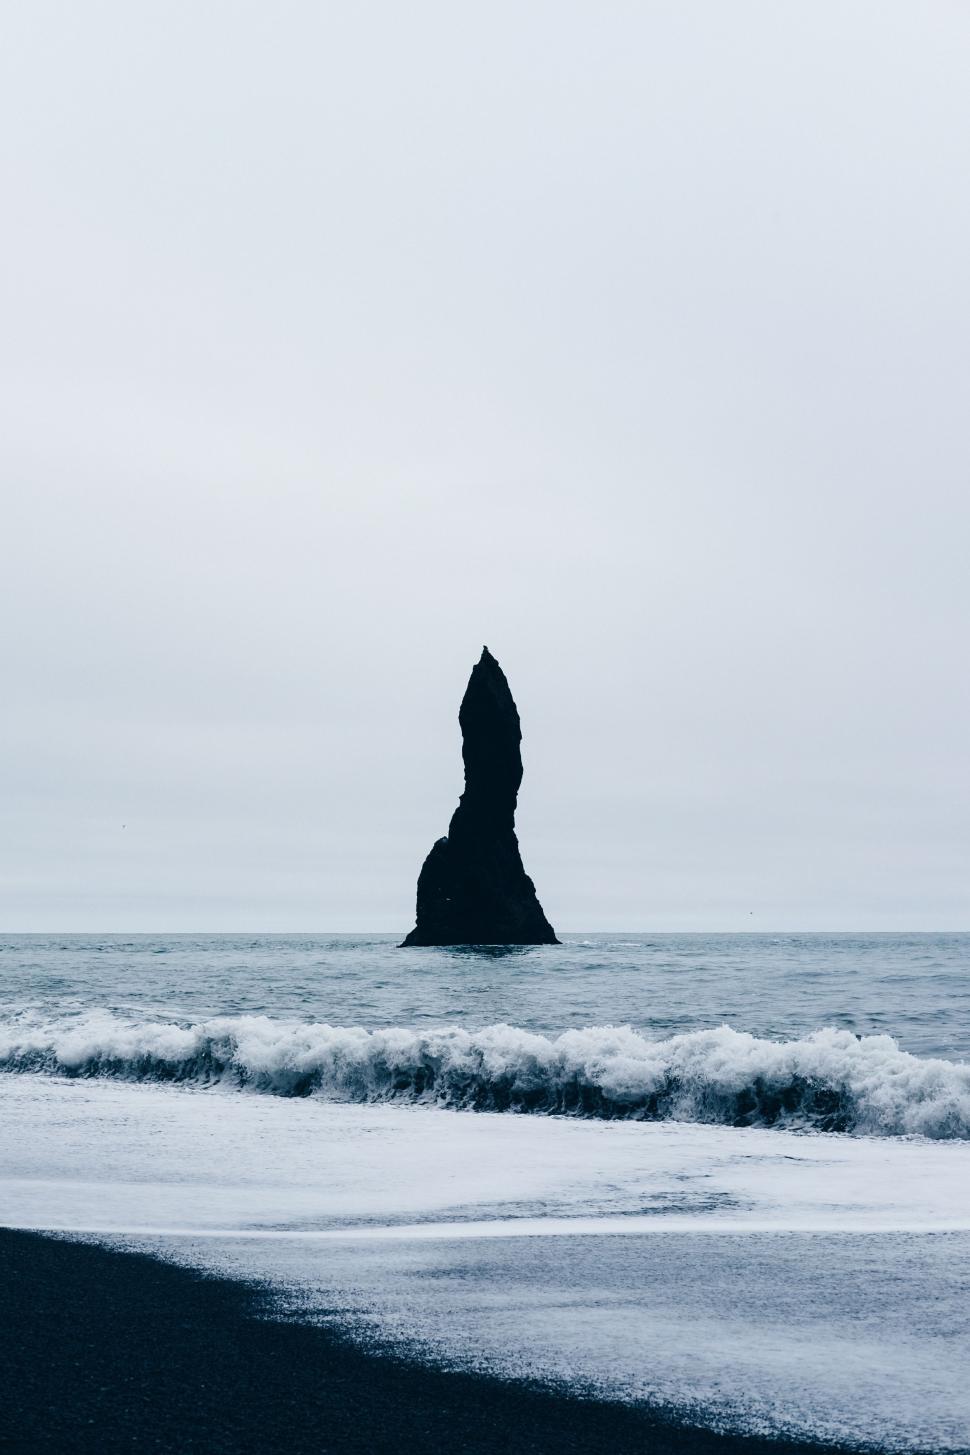 Free Image of Rock Formation Jutting Out of Ocean Next to Beach 